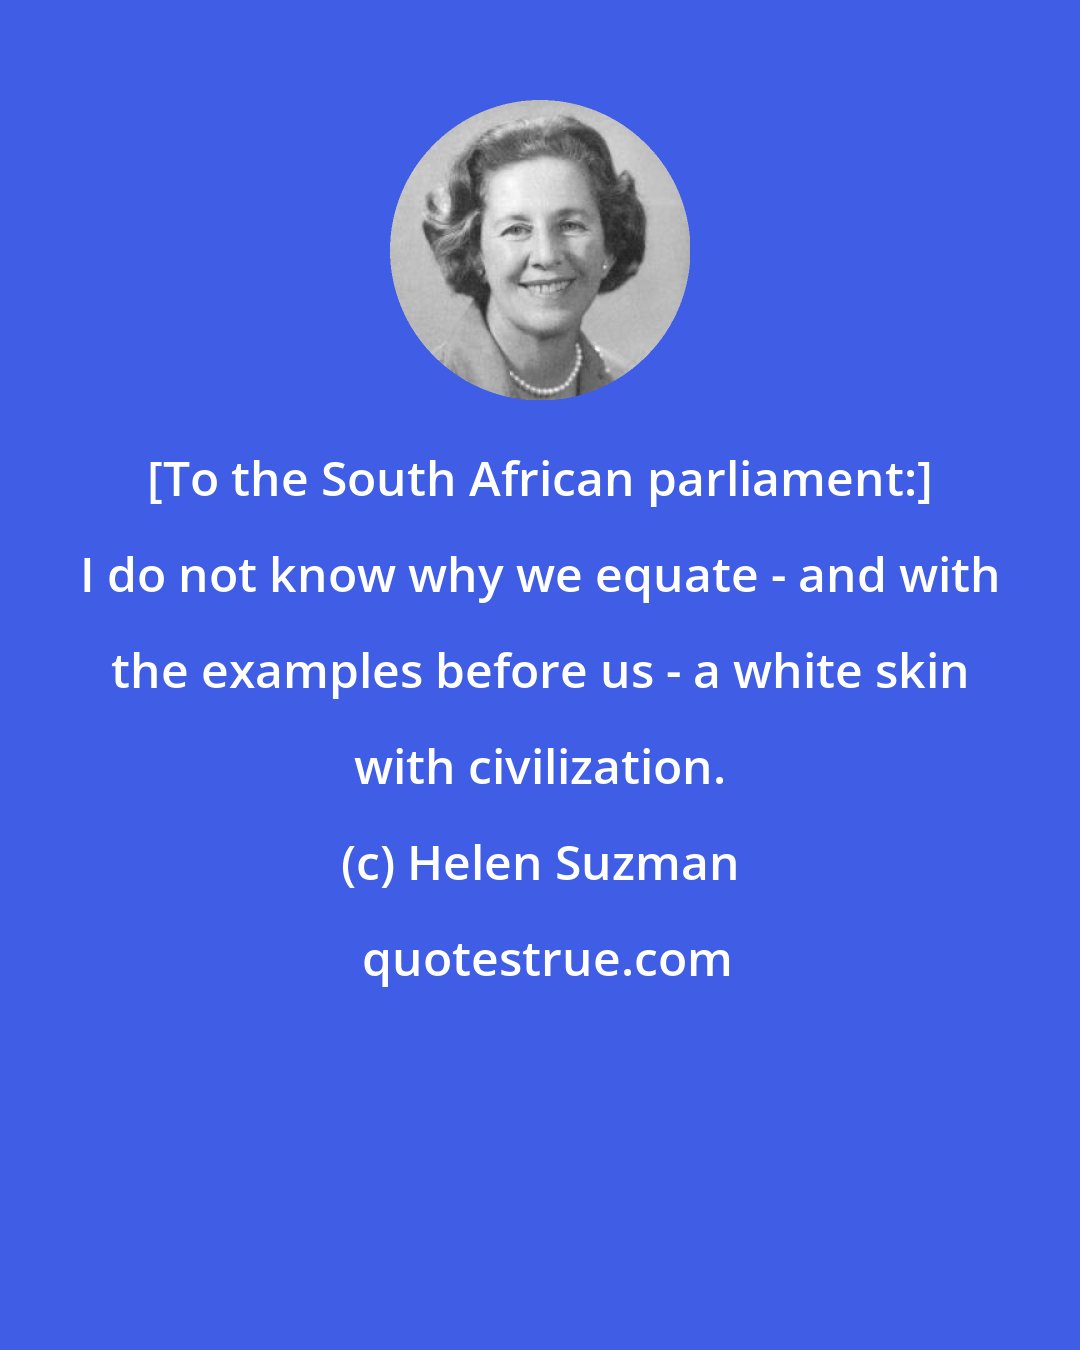 Helen Suzman: [To the South African parliament:] I do not know why we equate - and with the examples before us - a white skin with civilization.